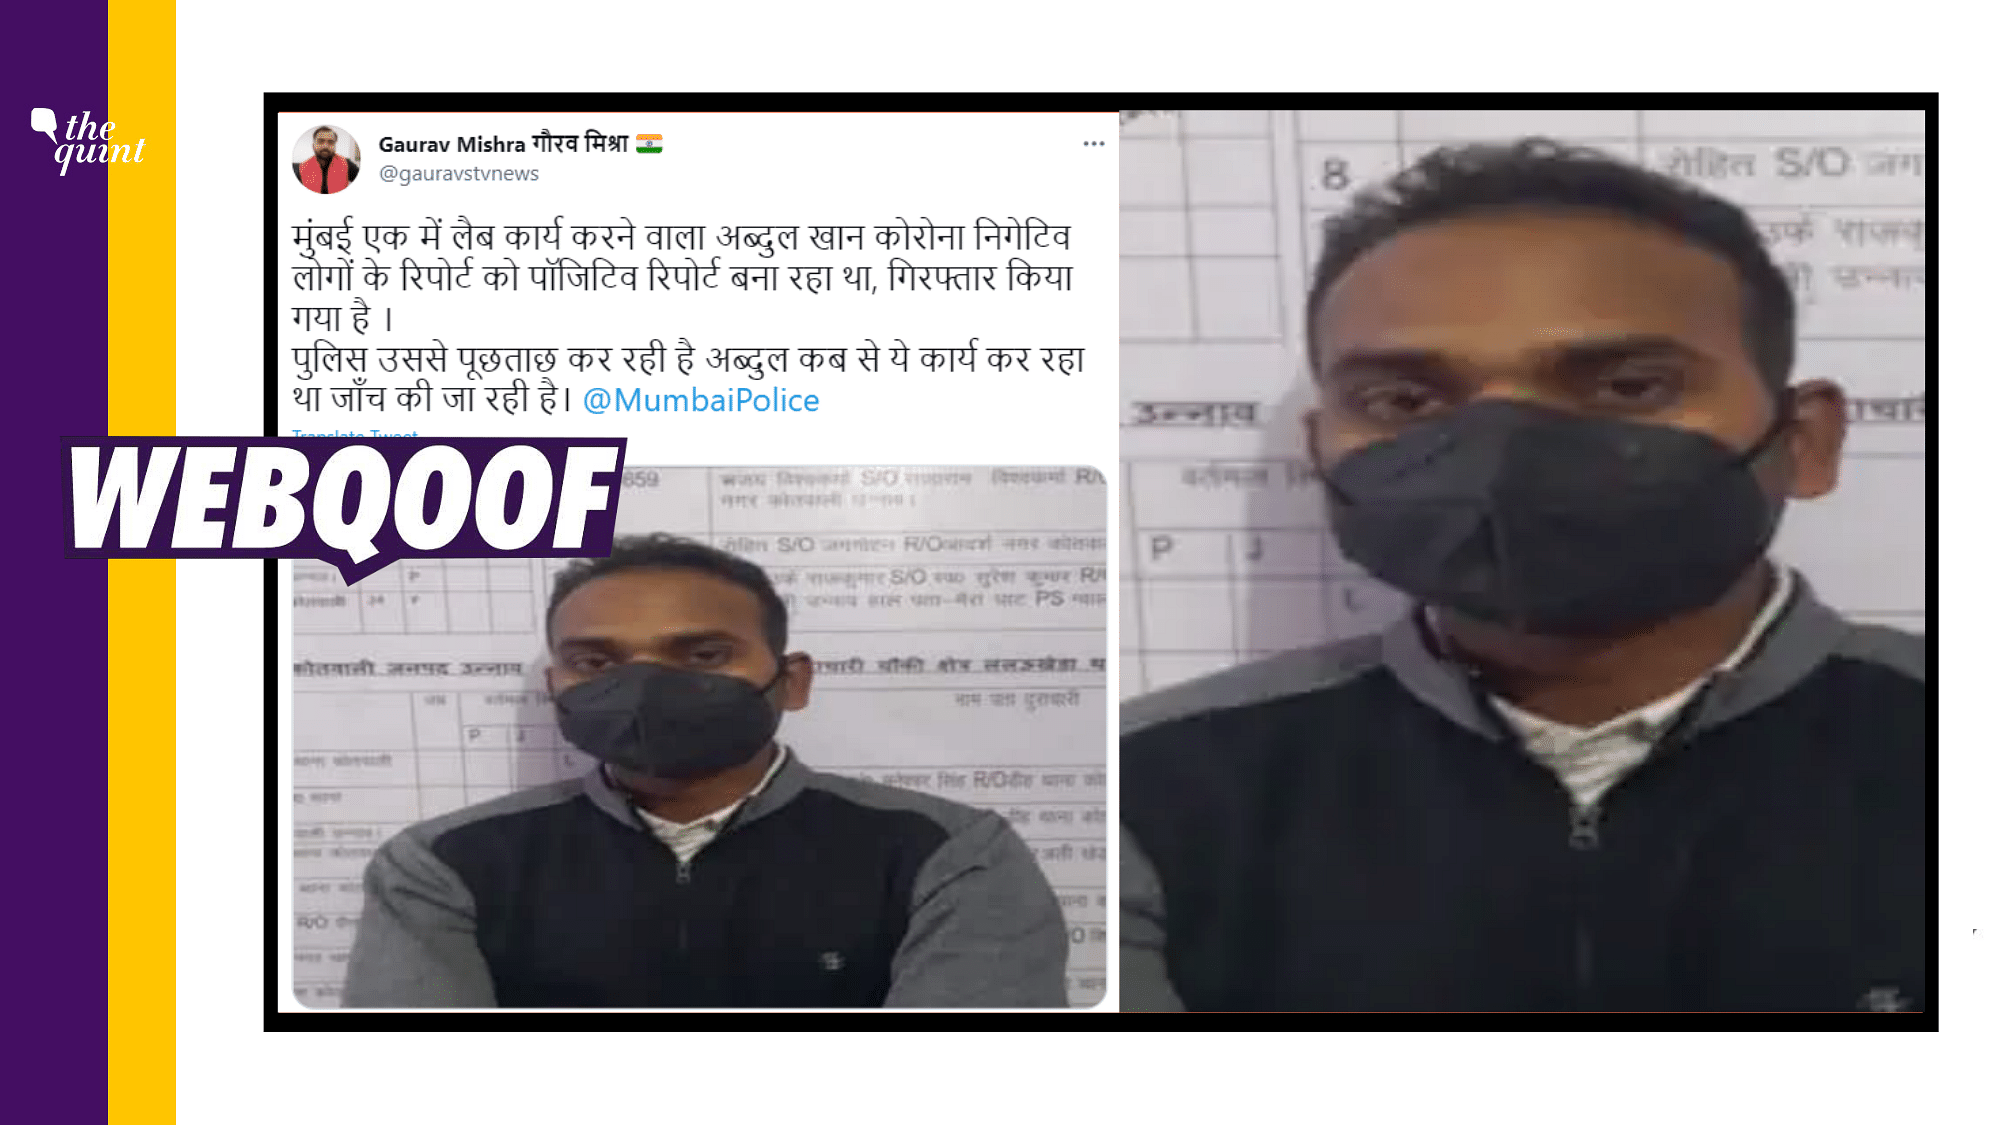 The image is of a lab technician in UP’s Unnao.